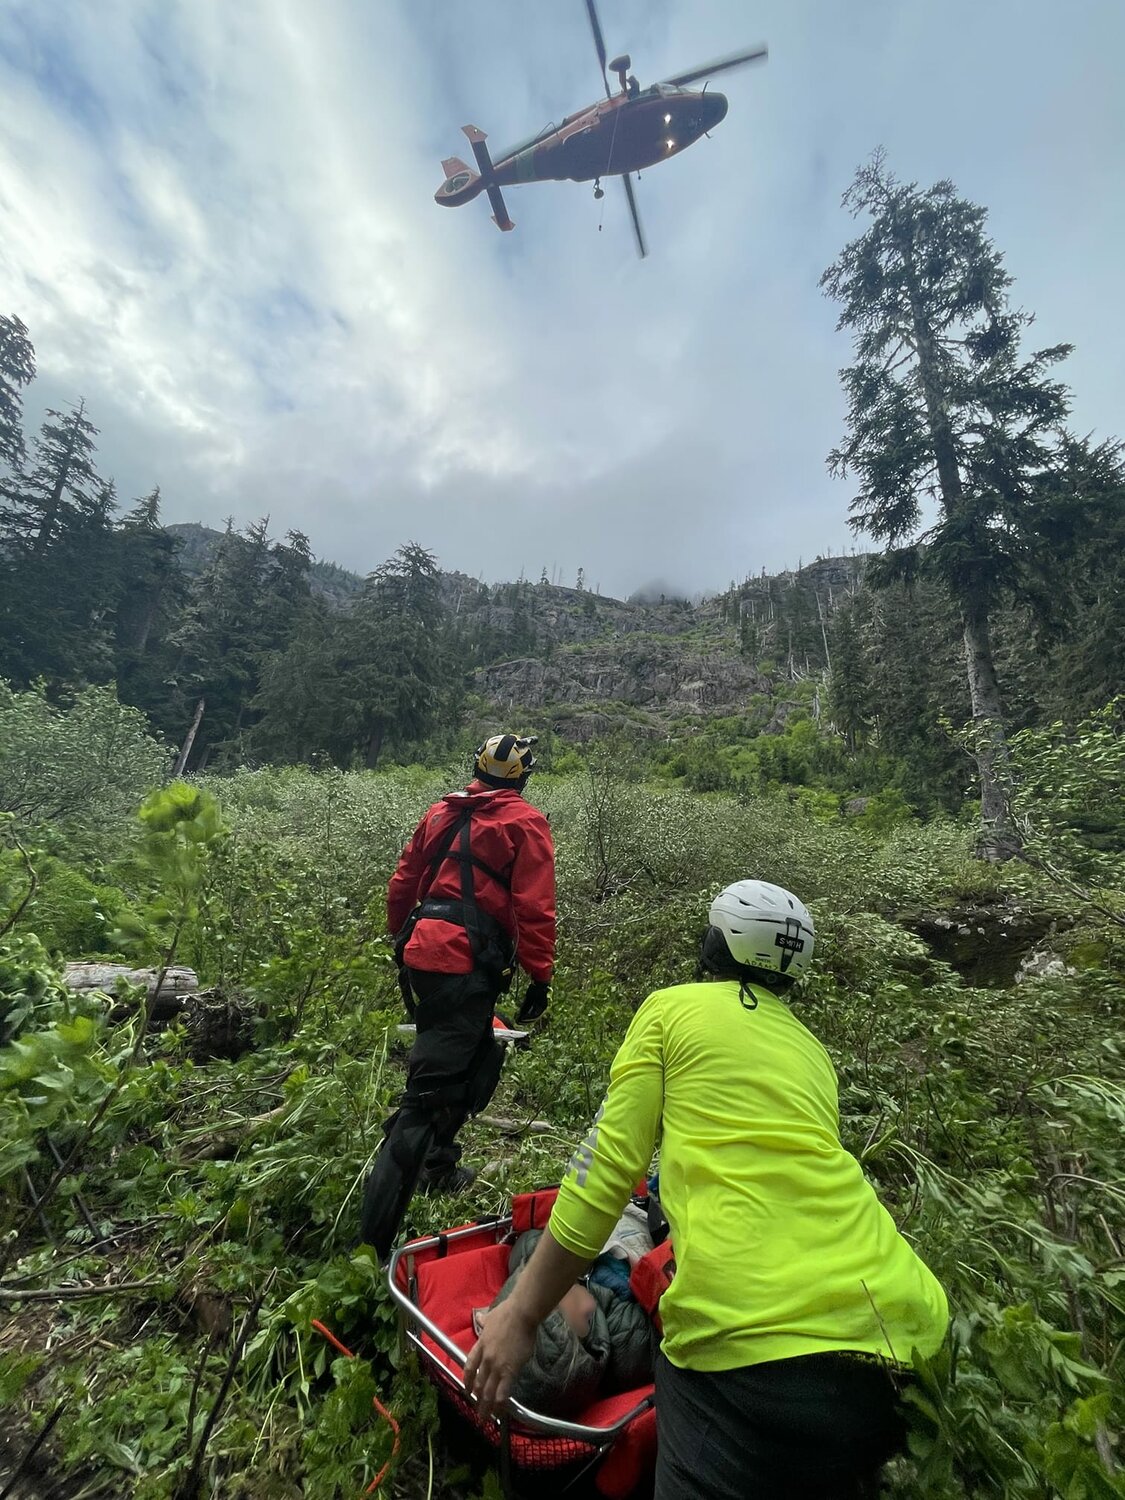 JSAR responded to a distress call from a climbing party on the Brothers in July 2022. The climber was located above Brothers basecamp approximately seven miles from the trailhead in very rugged terrain. A U.S. Coast Guard rescue helicopter from Air Station Port Angeles Coast Guard was called in to extract the injured party. JSAR member Adam Boling shields the patient from debris as the hook comes down. Photo courtesy JSAR